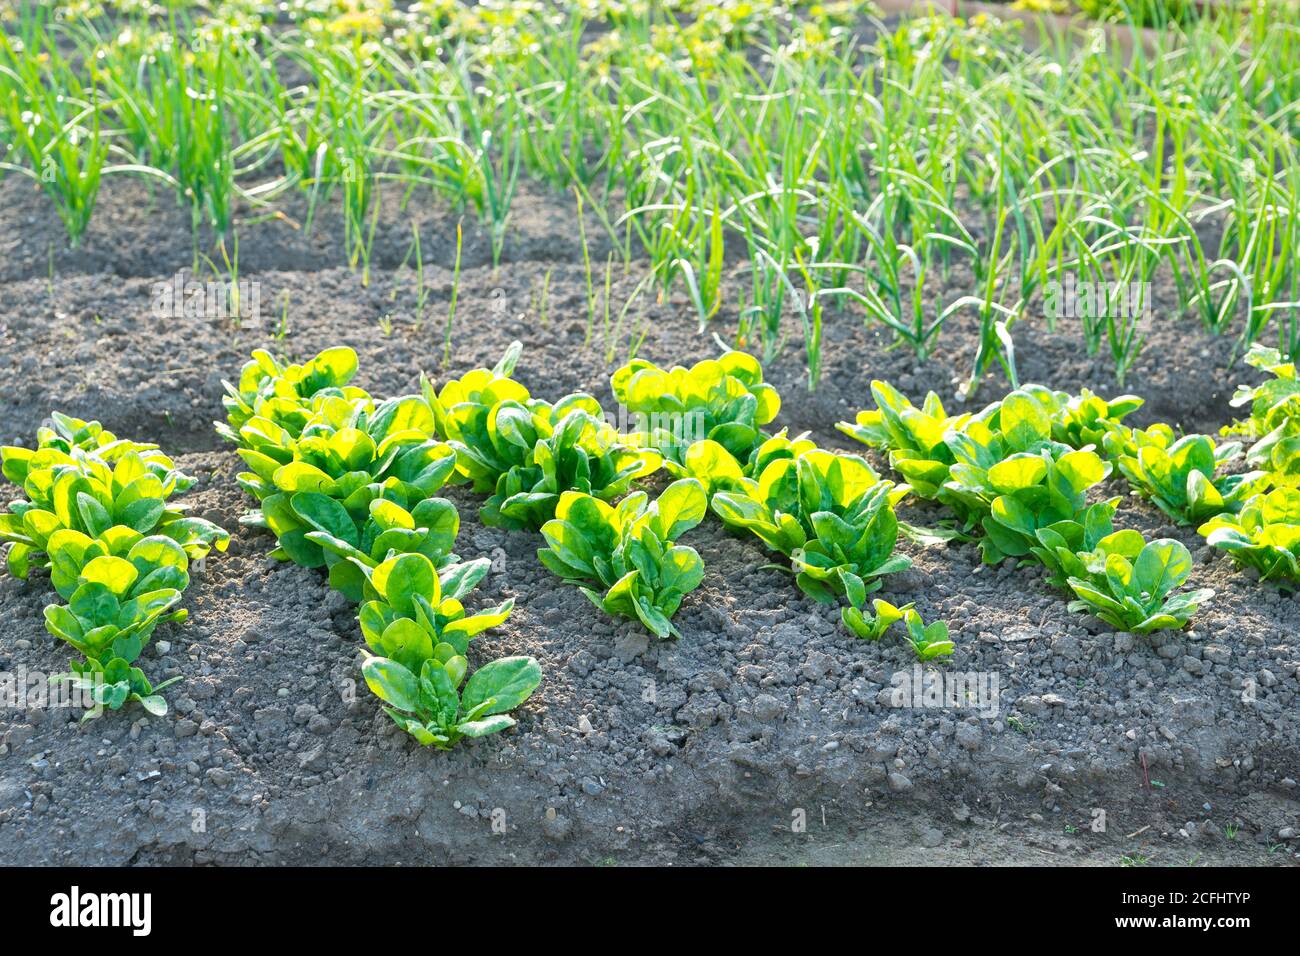 Young spinach in a sunny vegetable garden with scallions in the background. Stock Photo